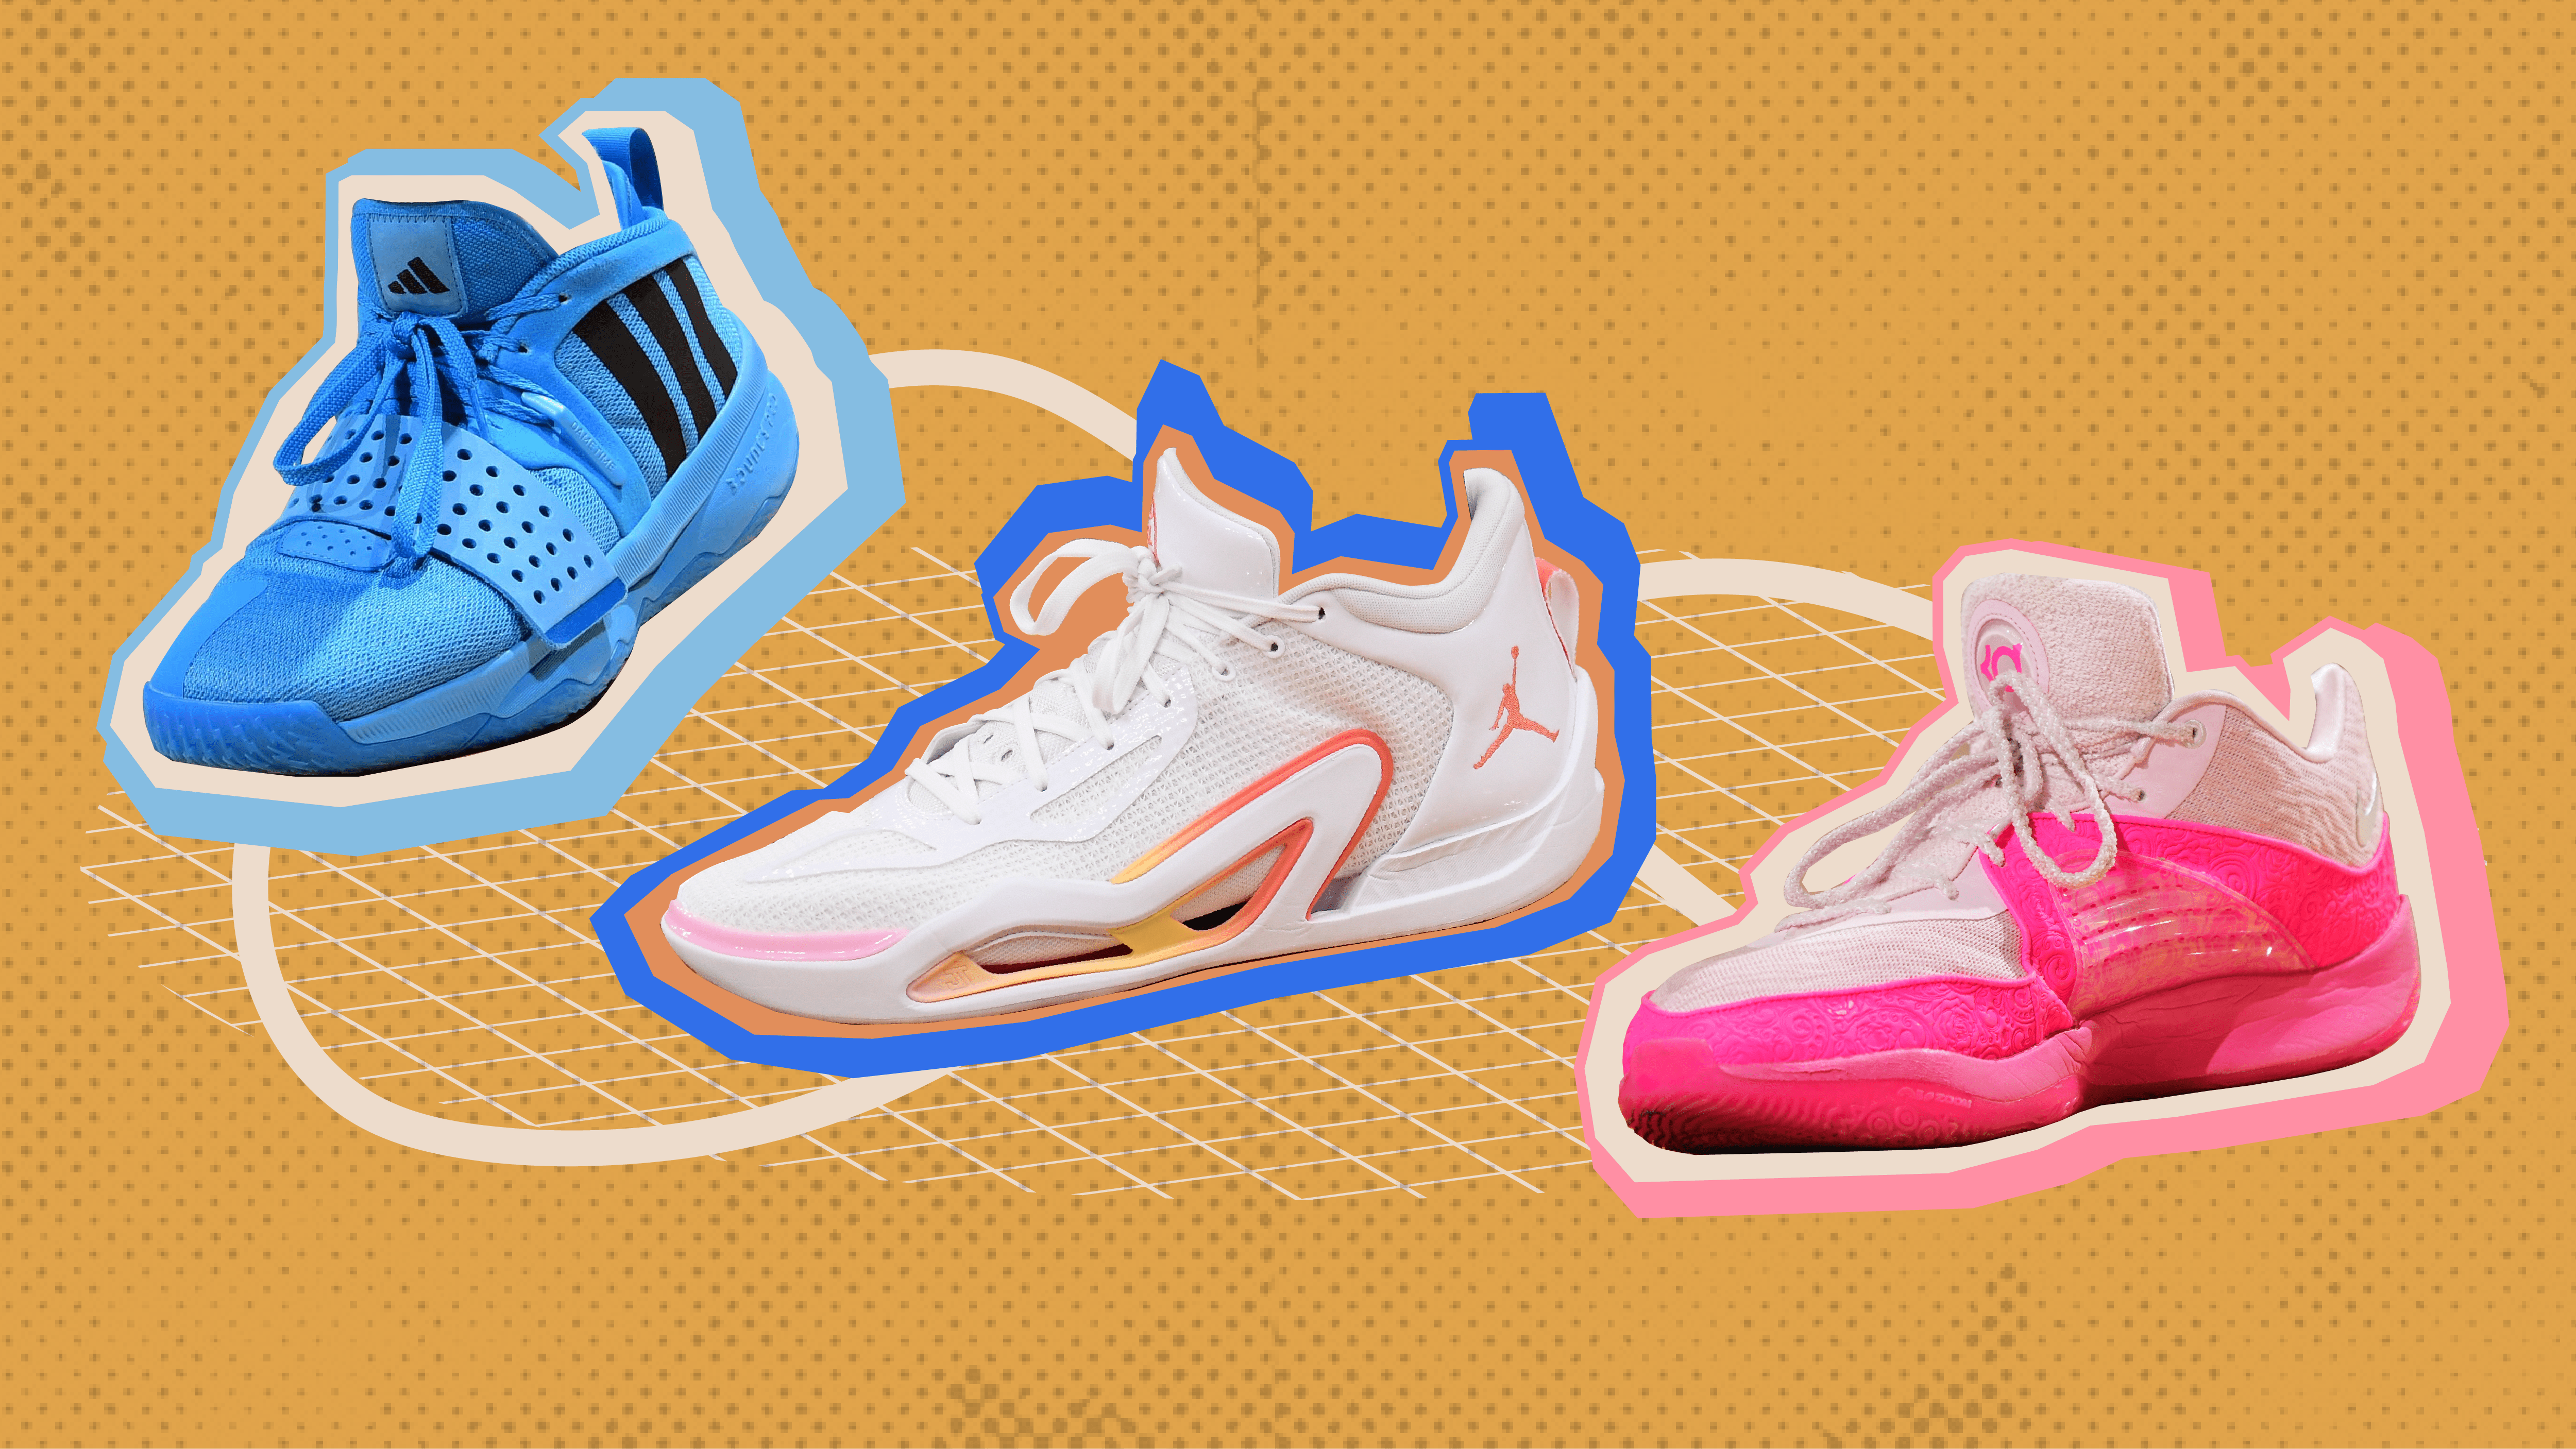 Which NBA players have Jordan Brand shoe contracts? Zion